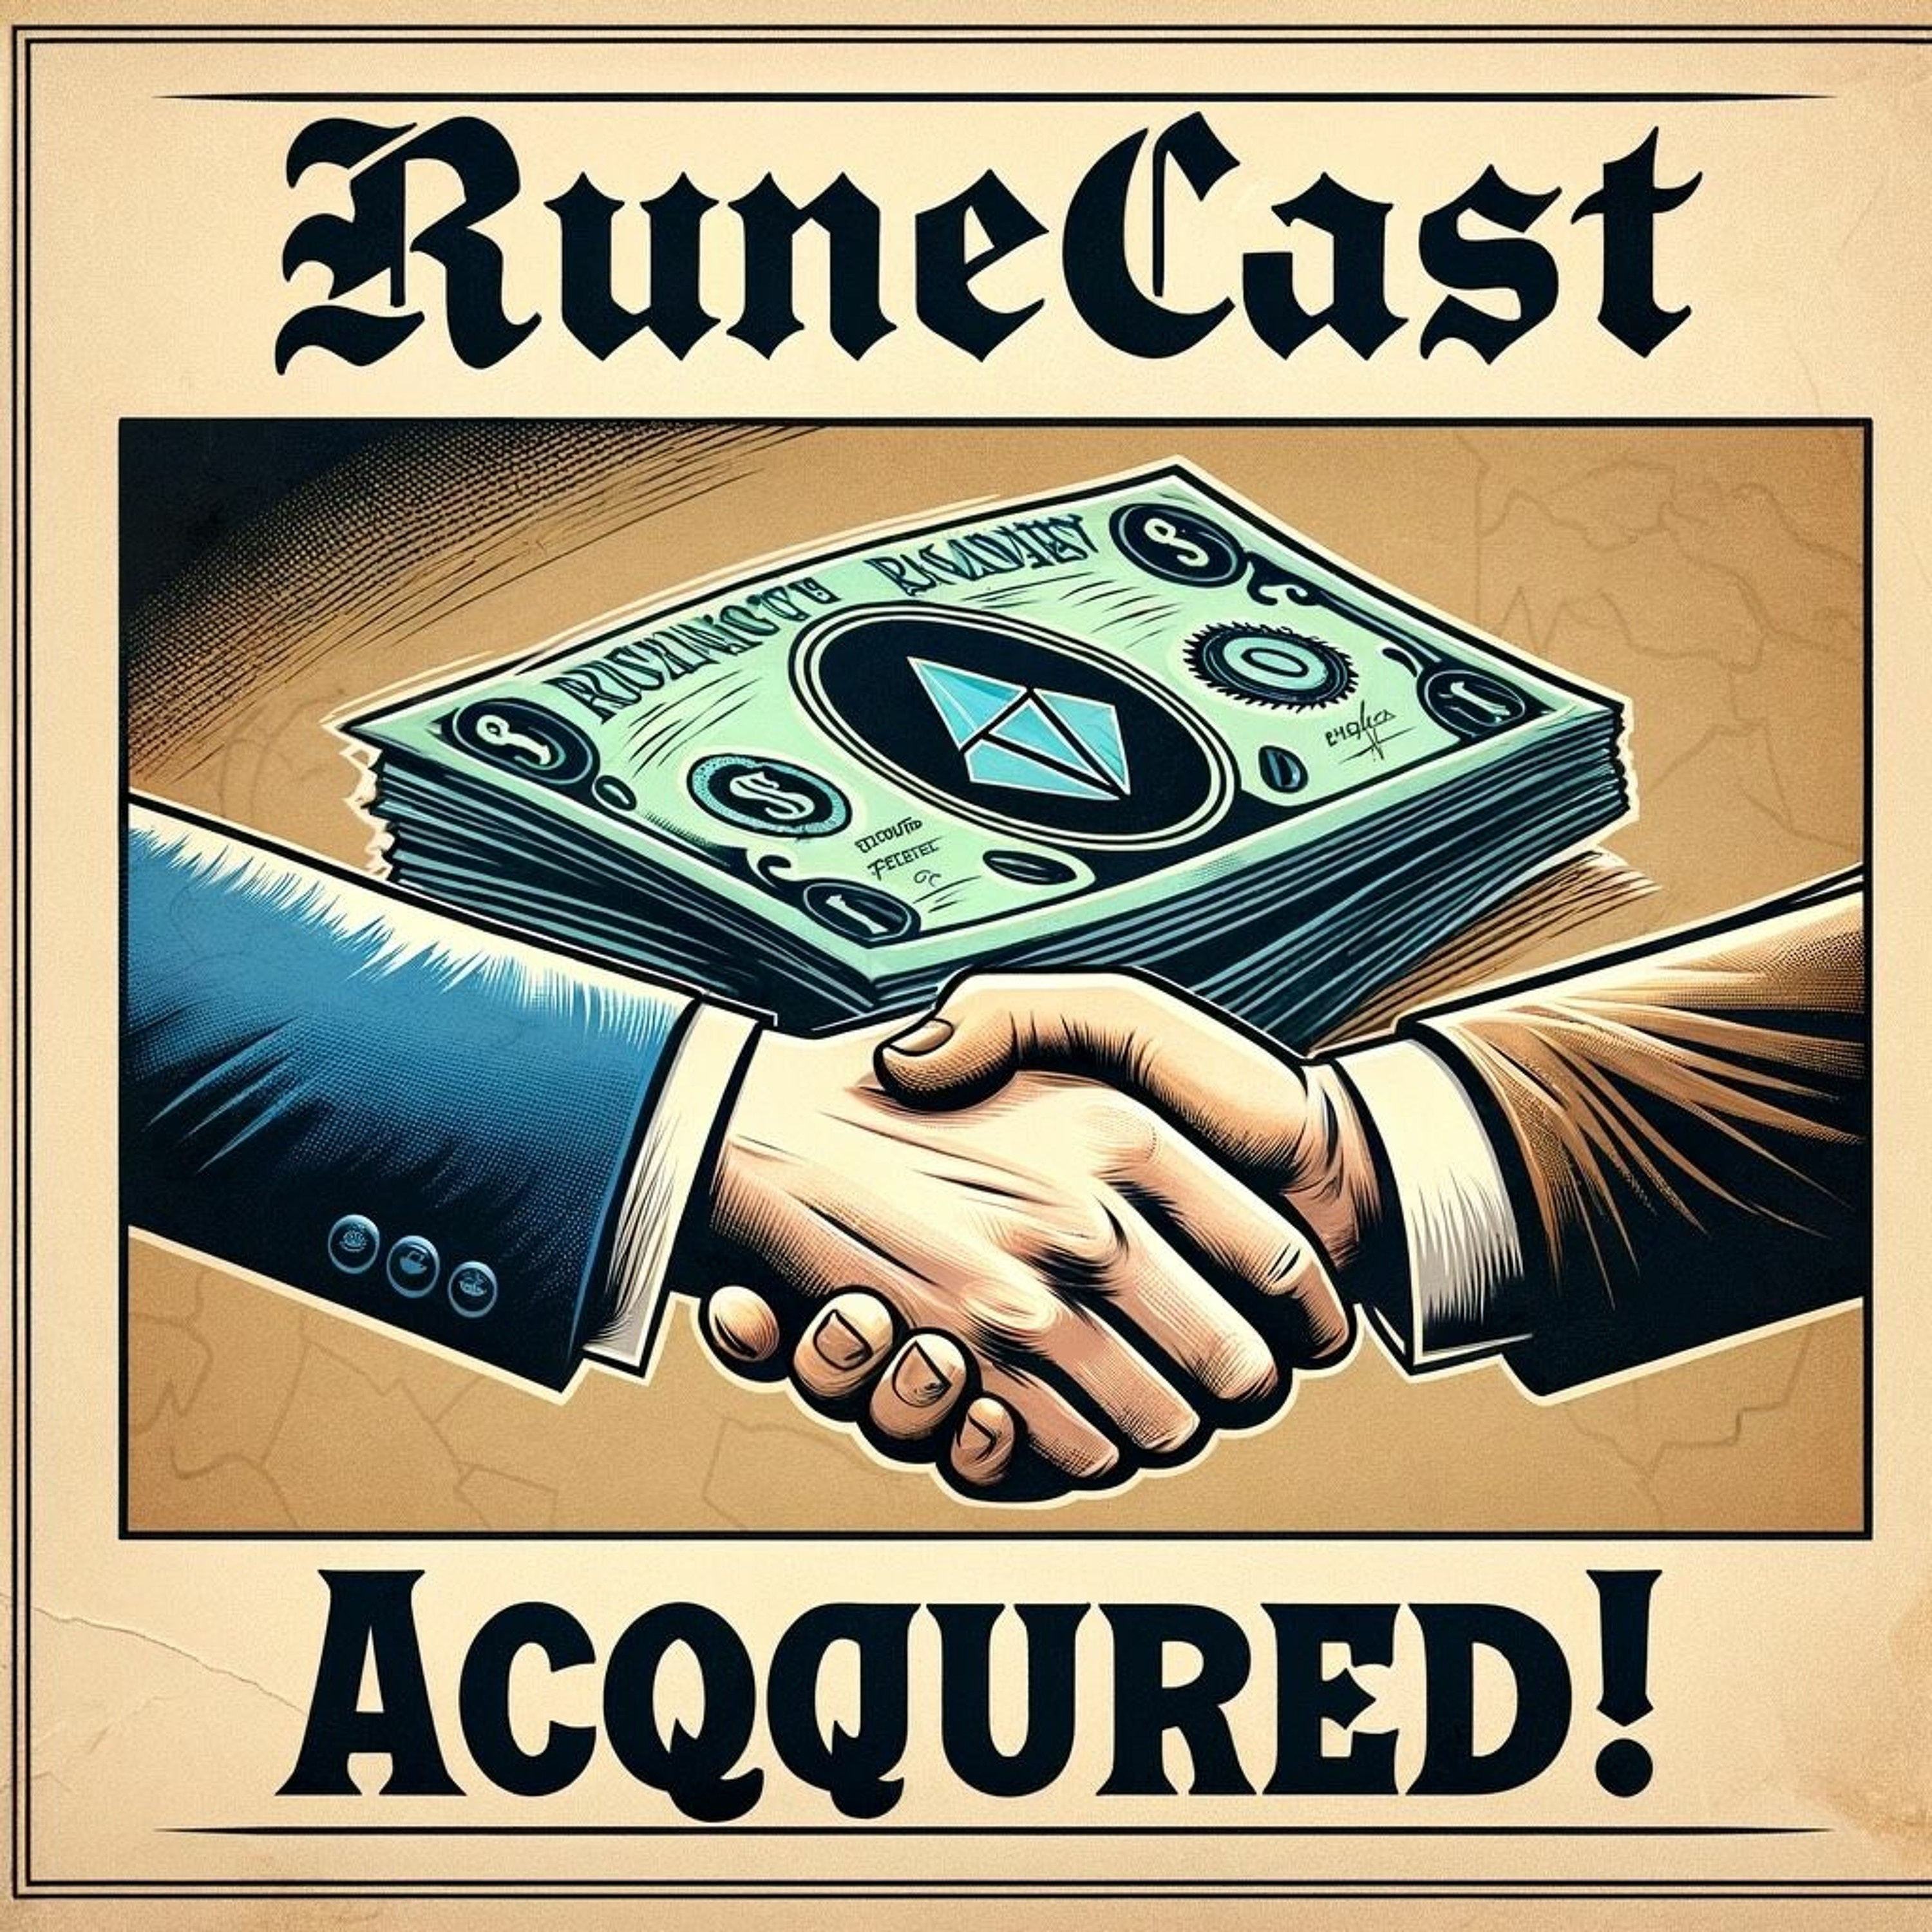 Windows Server 2025 Preview! Parallels DaaS Announced! Runecast Acquired!